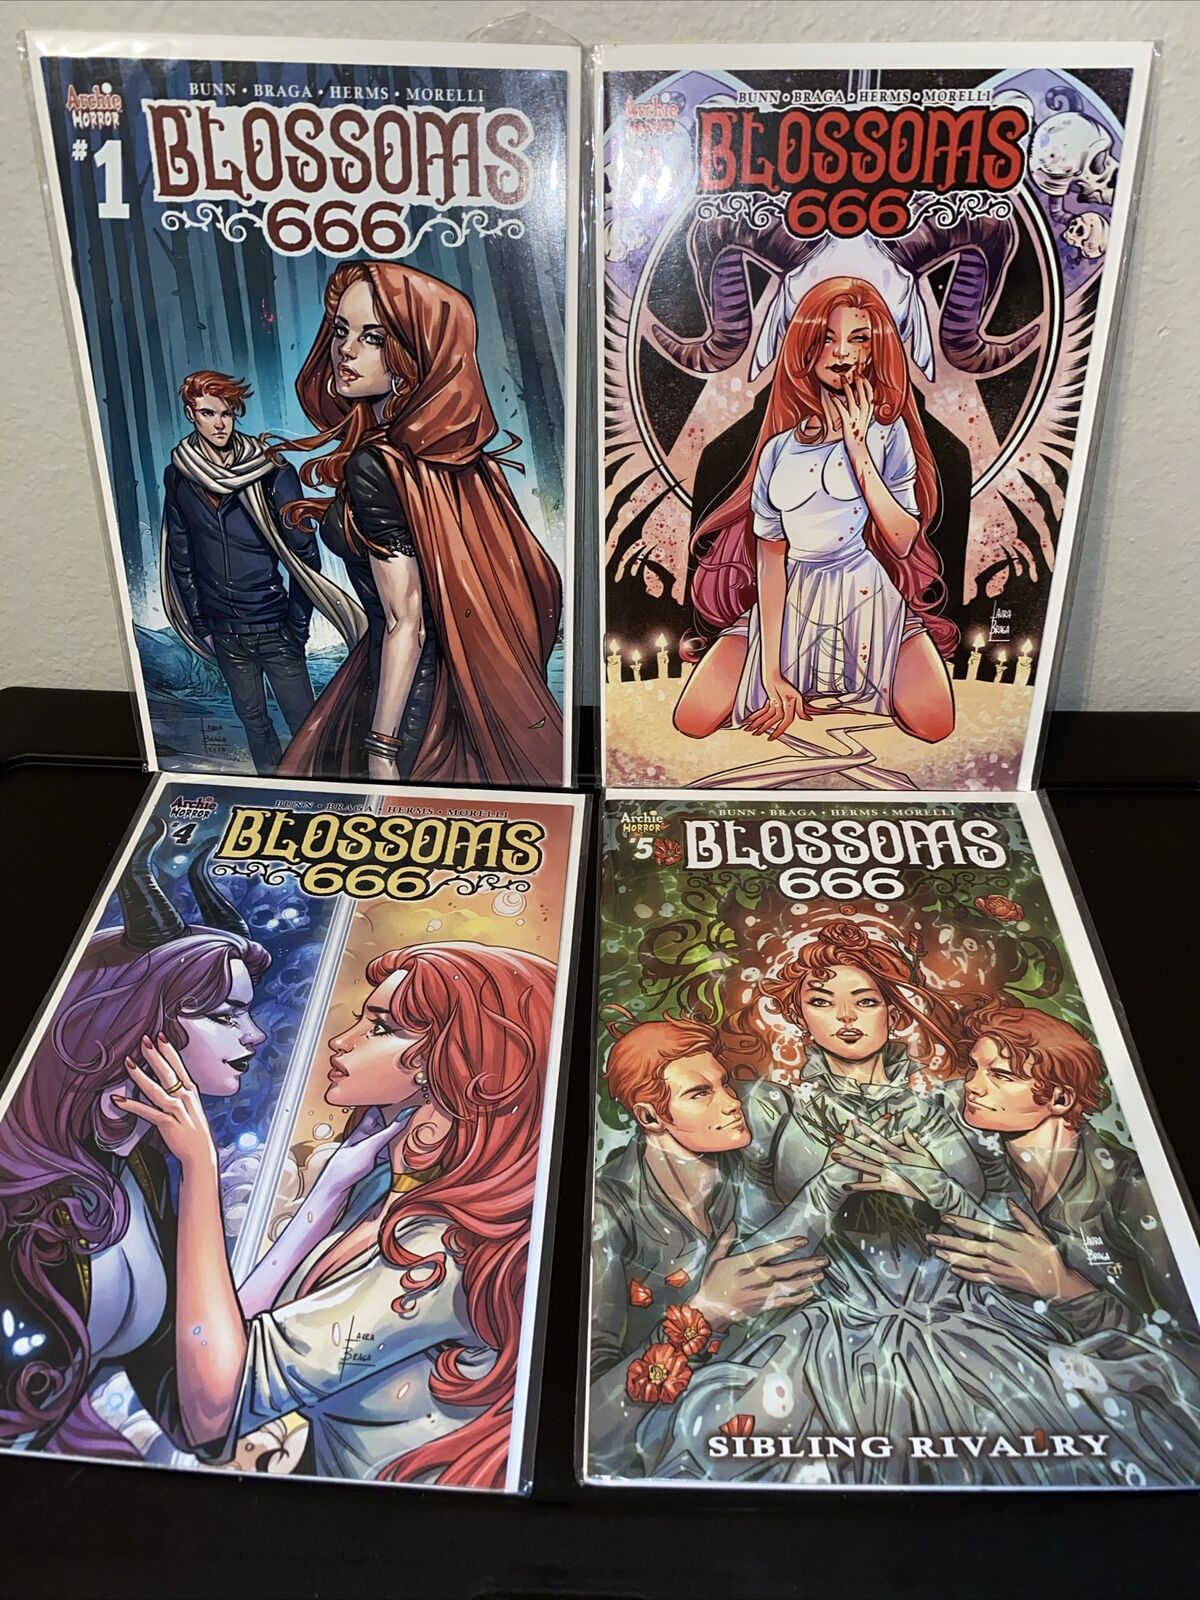 LOT OF 4 - BLOSSOMS 666 (2018 ARCHIE Horror ) COMIC BOOKS 1 2 4 5